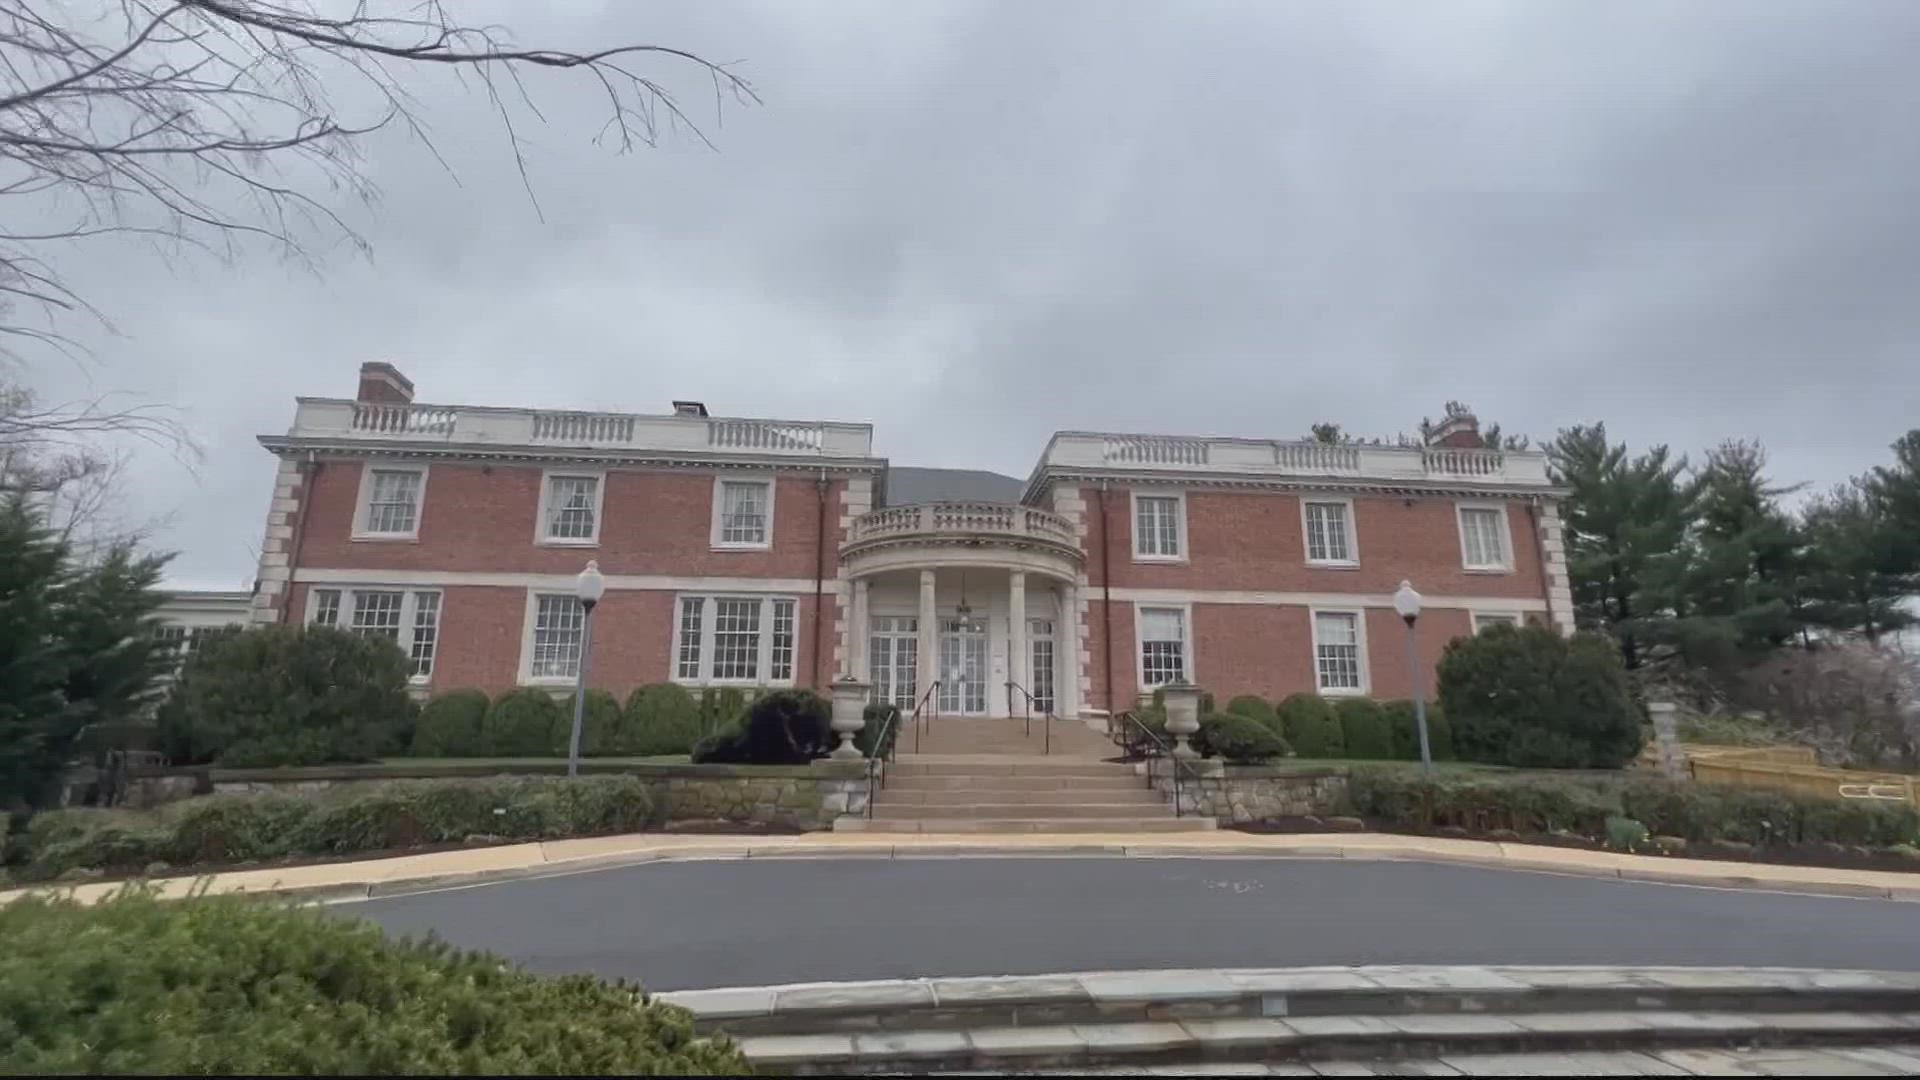 The beautiful mansion is now owned by Montgomery County.